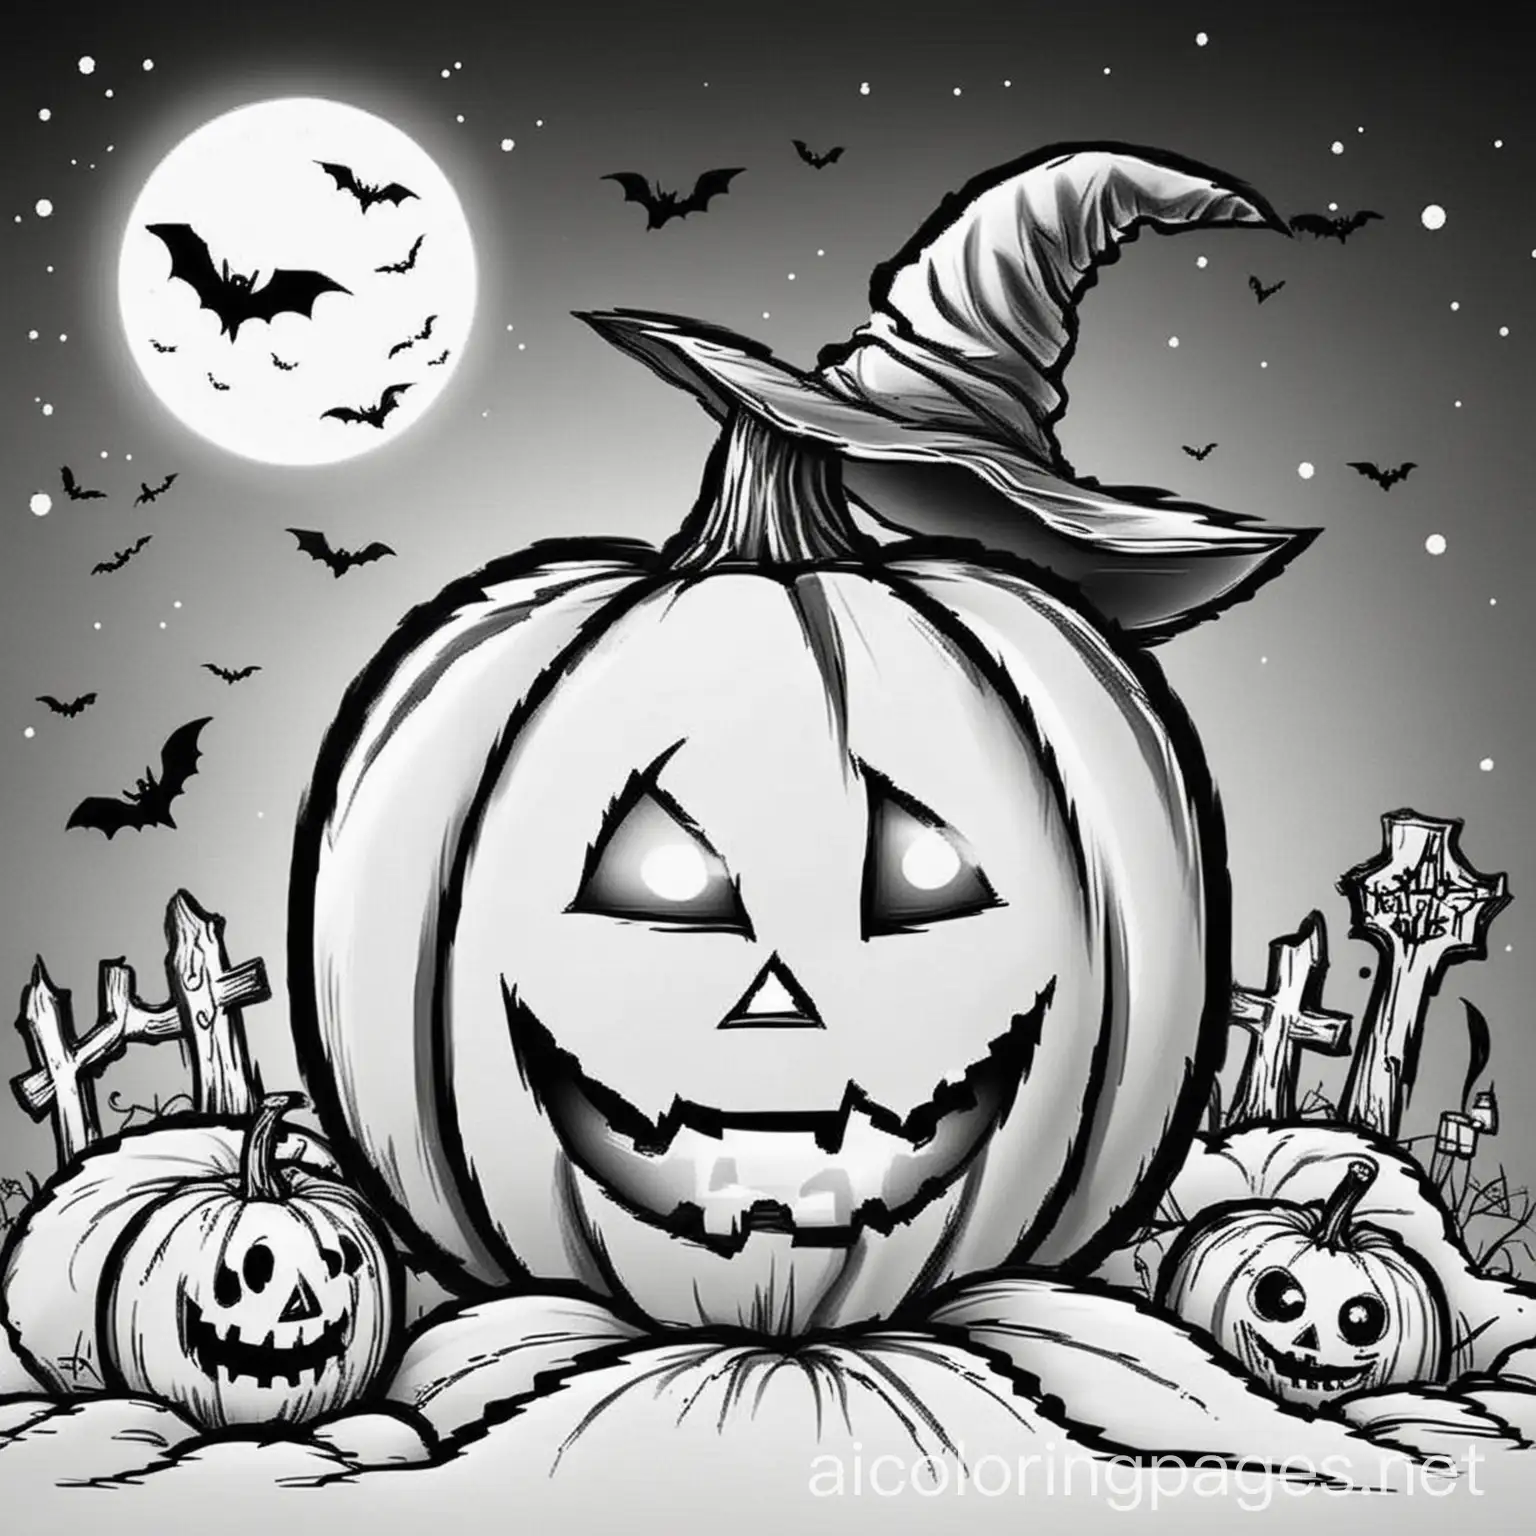 halloween coloring pages for kids, Coloring Page, black and white, line art, white background, Simplicity, Ample White Space. The background of the coloring page is plain white to make it easy for young children to color within the lines. The outlines of all the subjects are easy to distinguish, making it simple for kids to color without too much difficulty